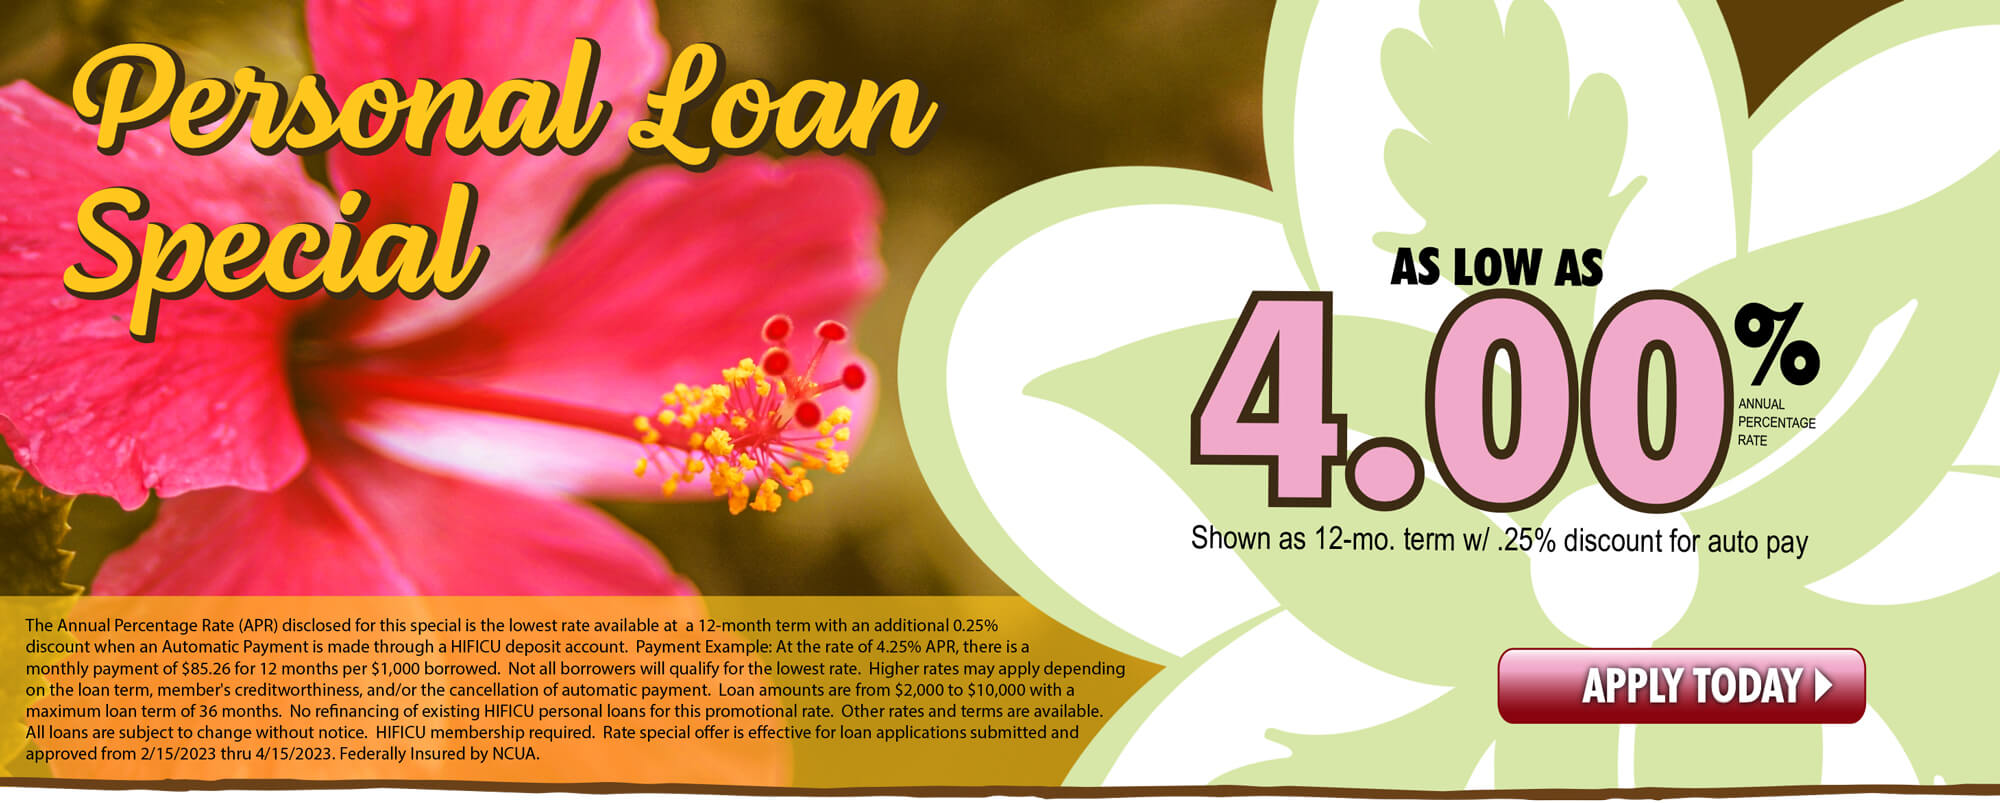 Personal Loan Special